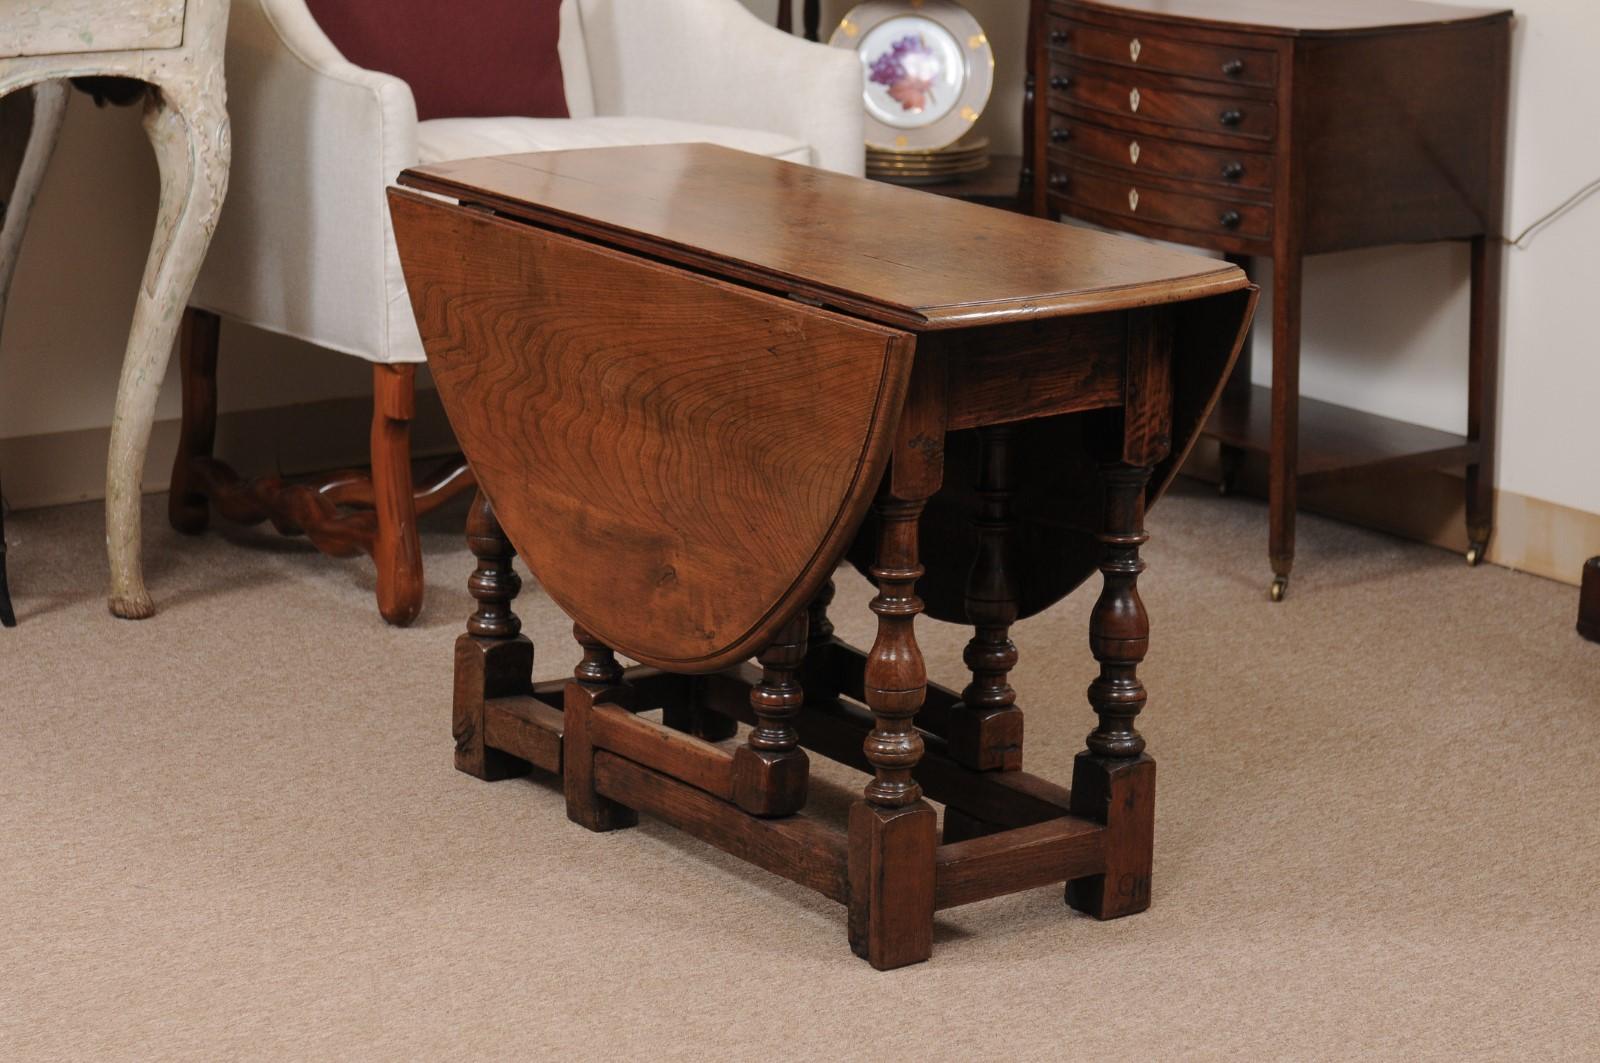 18th Century English Walnut Gate Leg Table with Drop Leaves & Turned Legs In Good Condition For Sale In Atlanta, GA